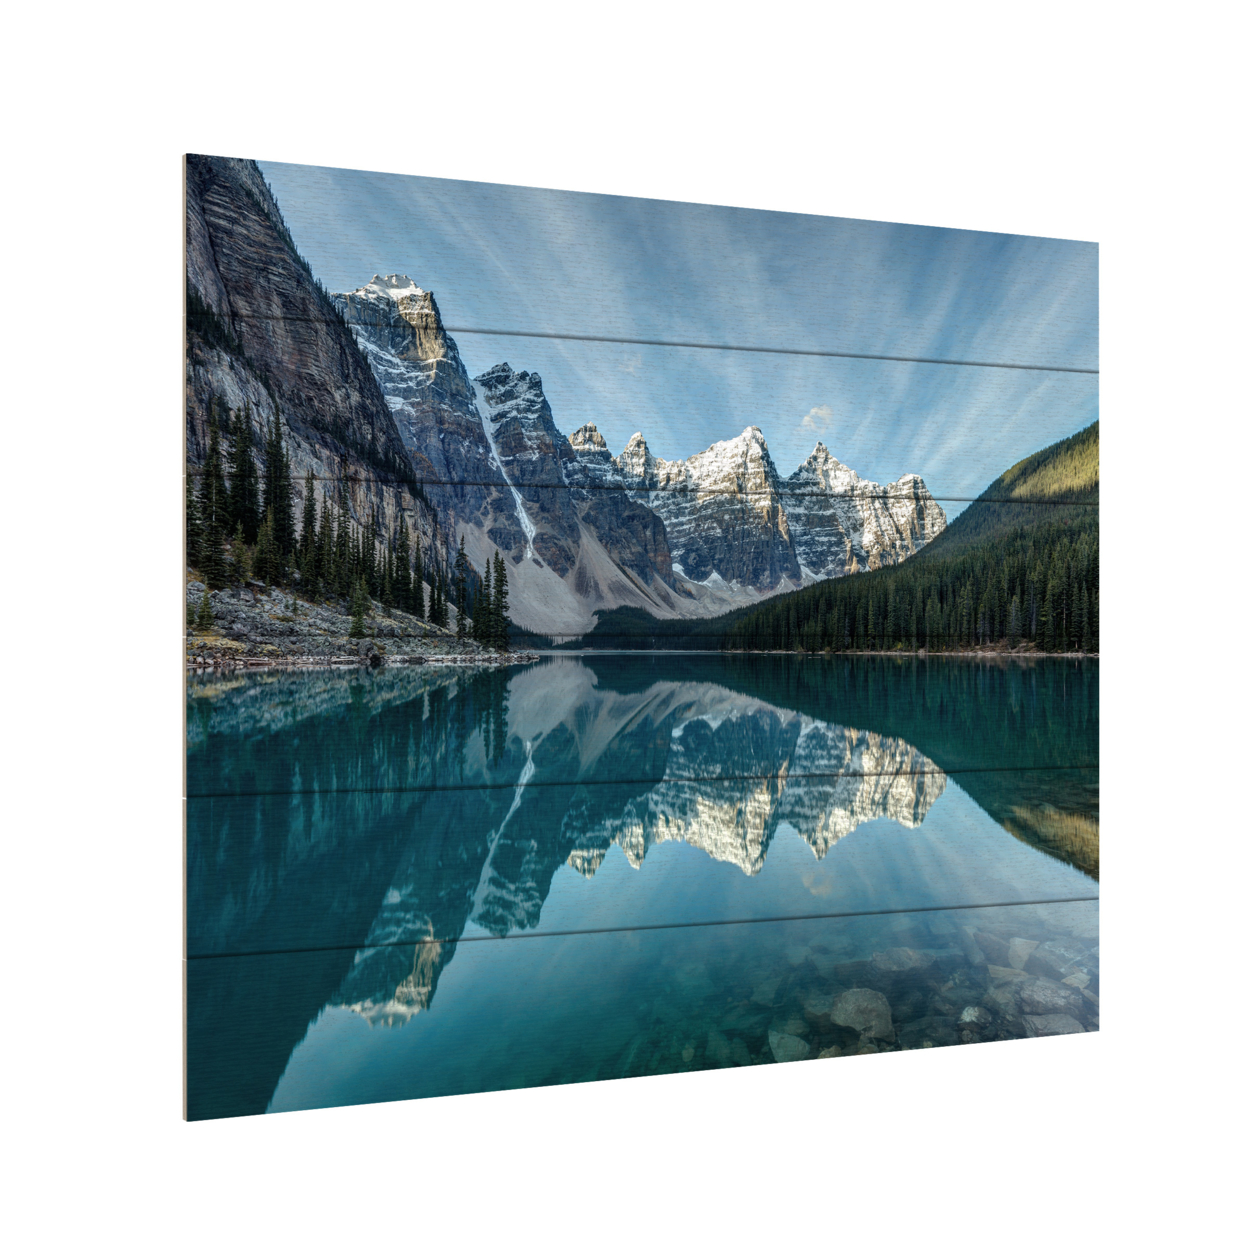 Wooden Slat Art 18 X 22 Inches Titled Moraine Lake Reflection Ready To Hang Home Decor Picture